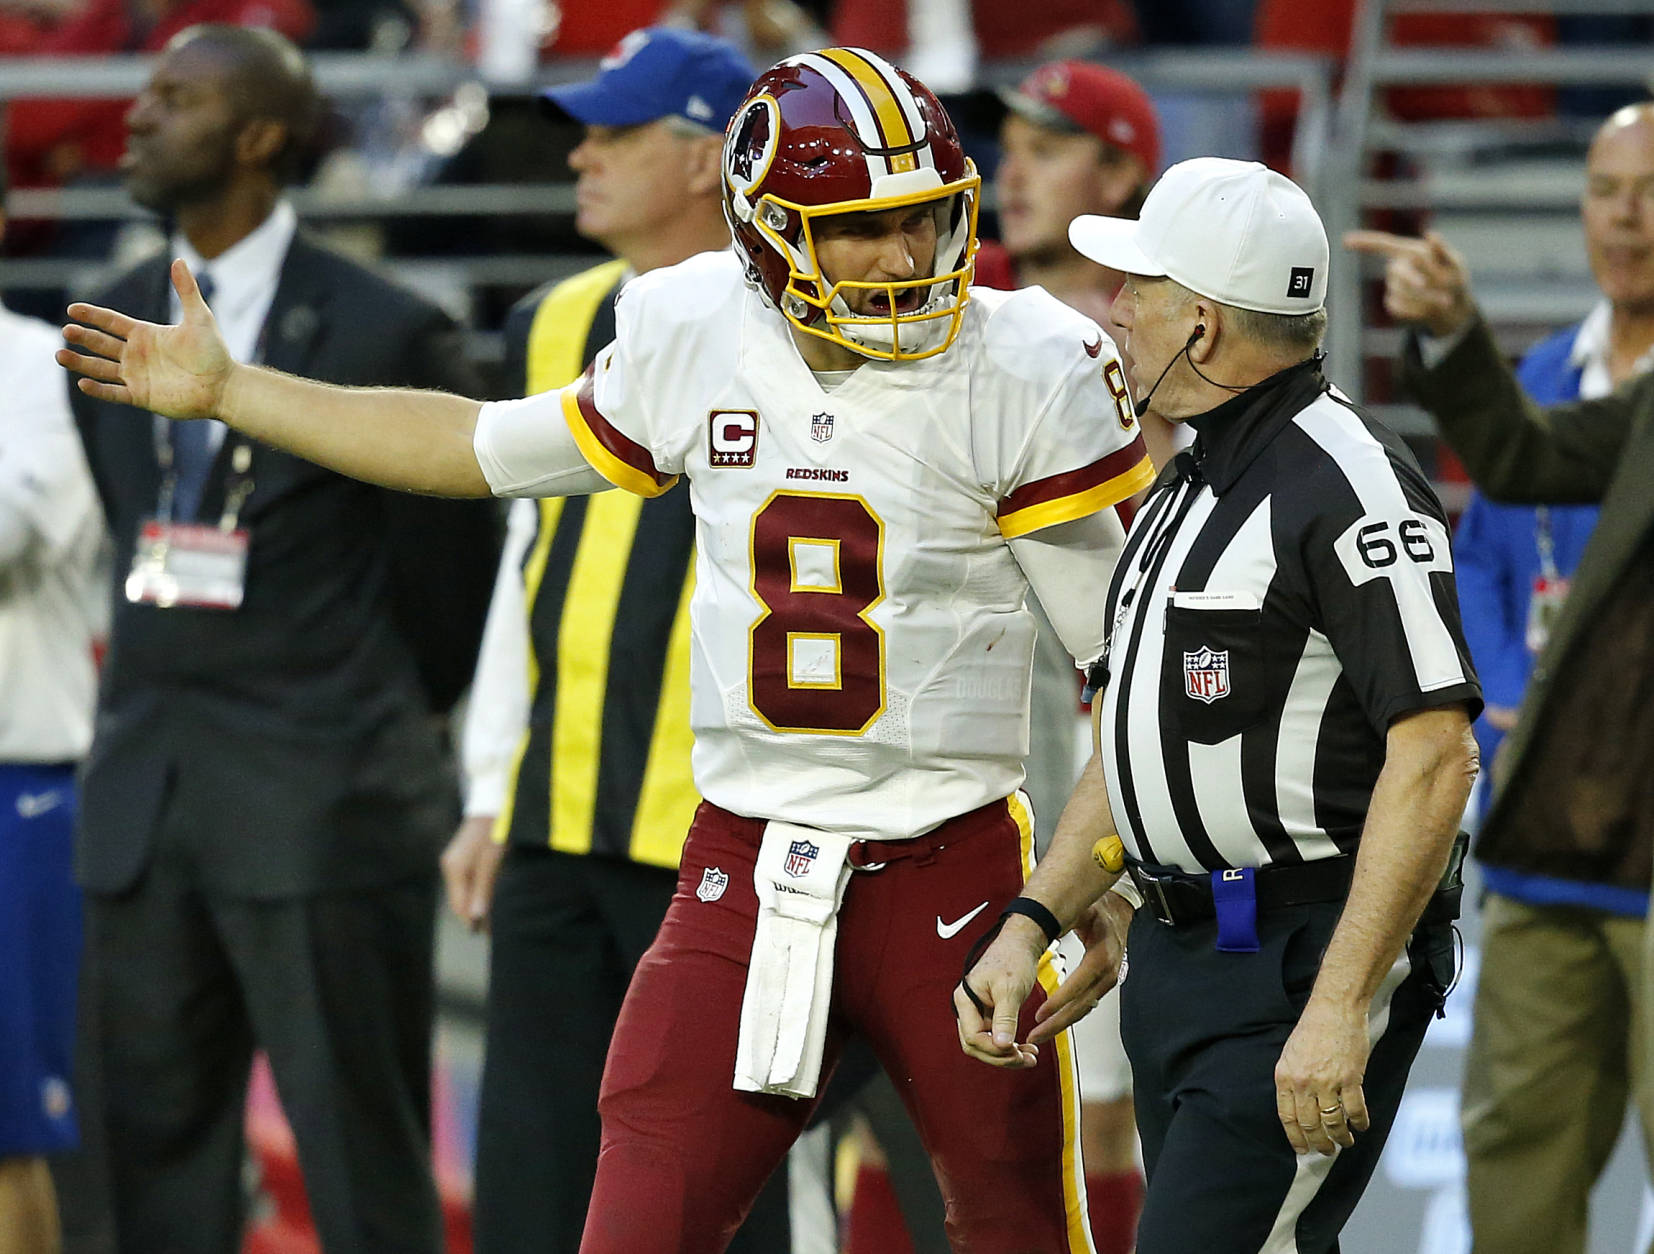 Washington Redskins quarterback Kirk Cousins (8) argues a call with referee Walt Anderson (66) during the second half of an NFL football game against the Arizona Cardinals, Sunday, Dec. 4, 2016, in Glendale, Ariz. (AP Photo/Ross D. Franklin)